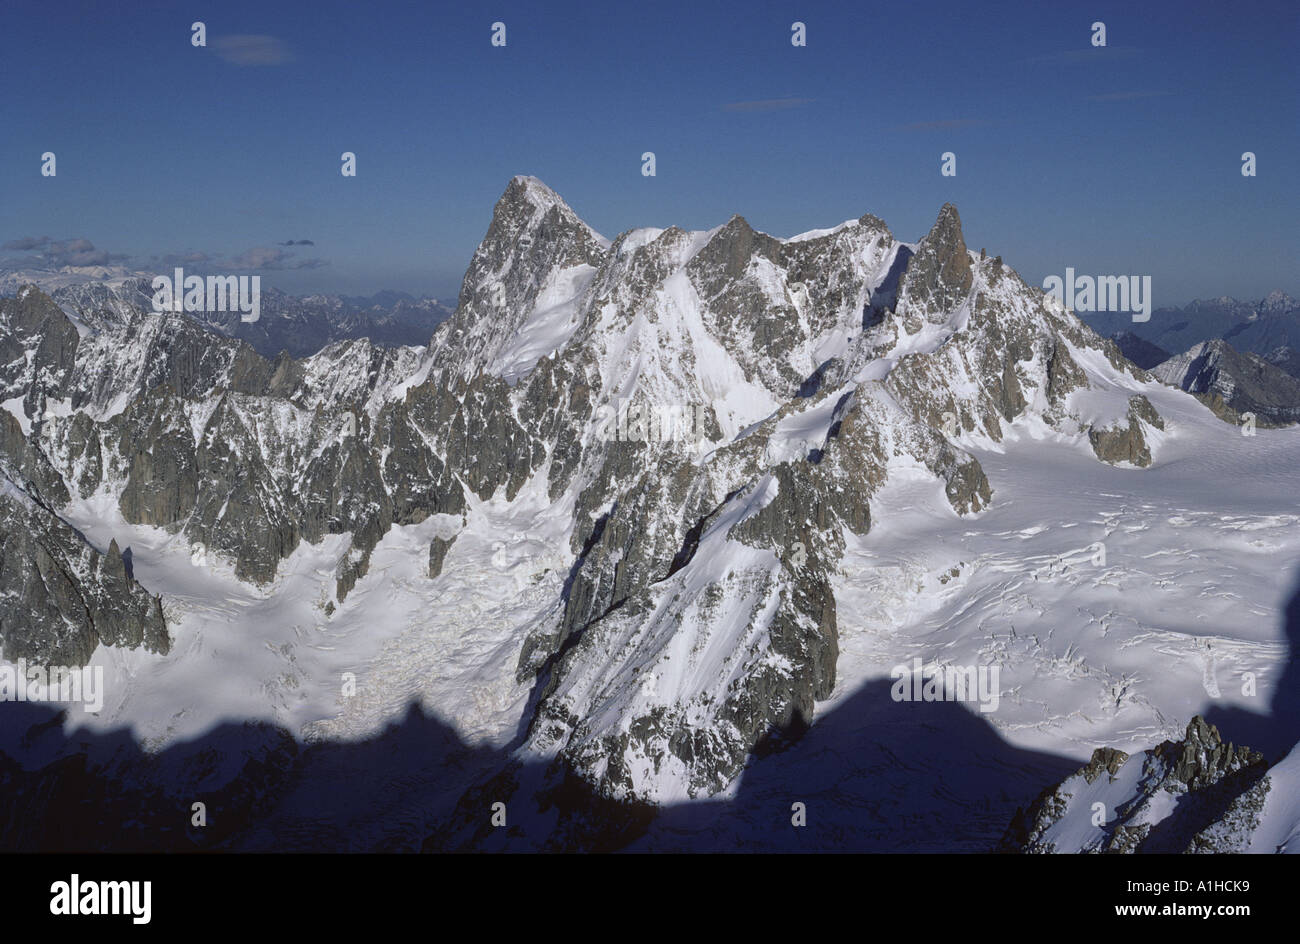 French face of the Rochefort From left to right Grande Jorasses Mont Mallet Aiguille de Rochefort and Aiguille de Géant Chamonix Stock Photo